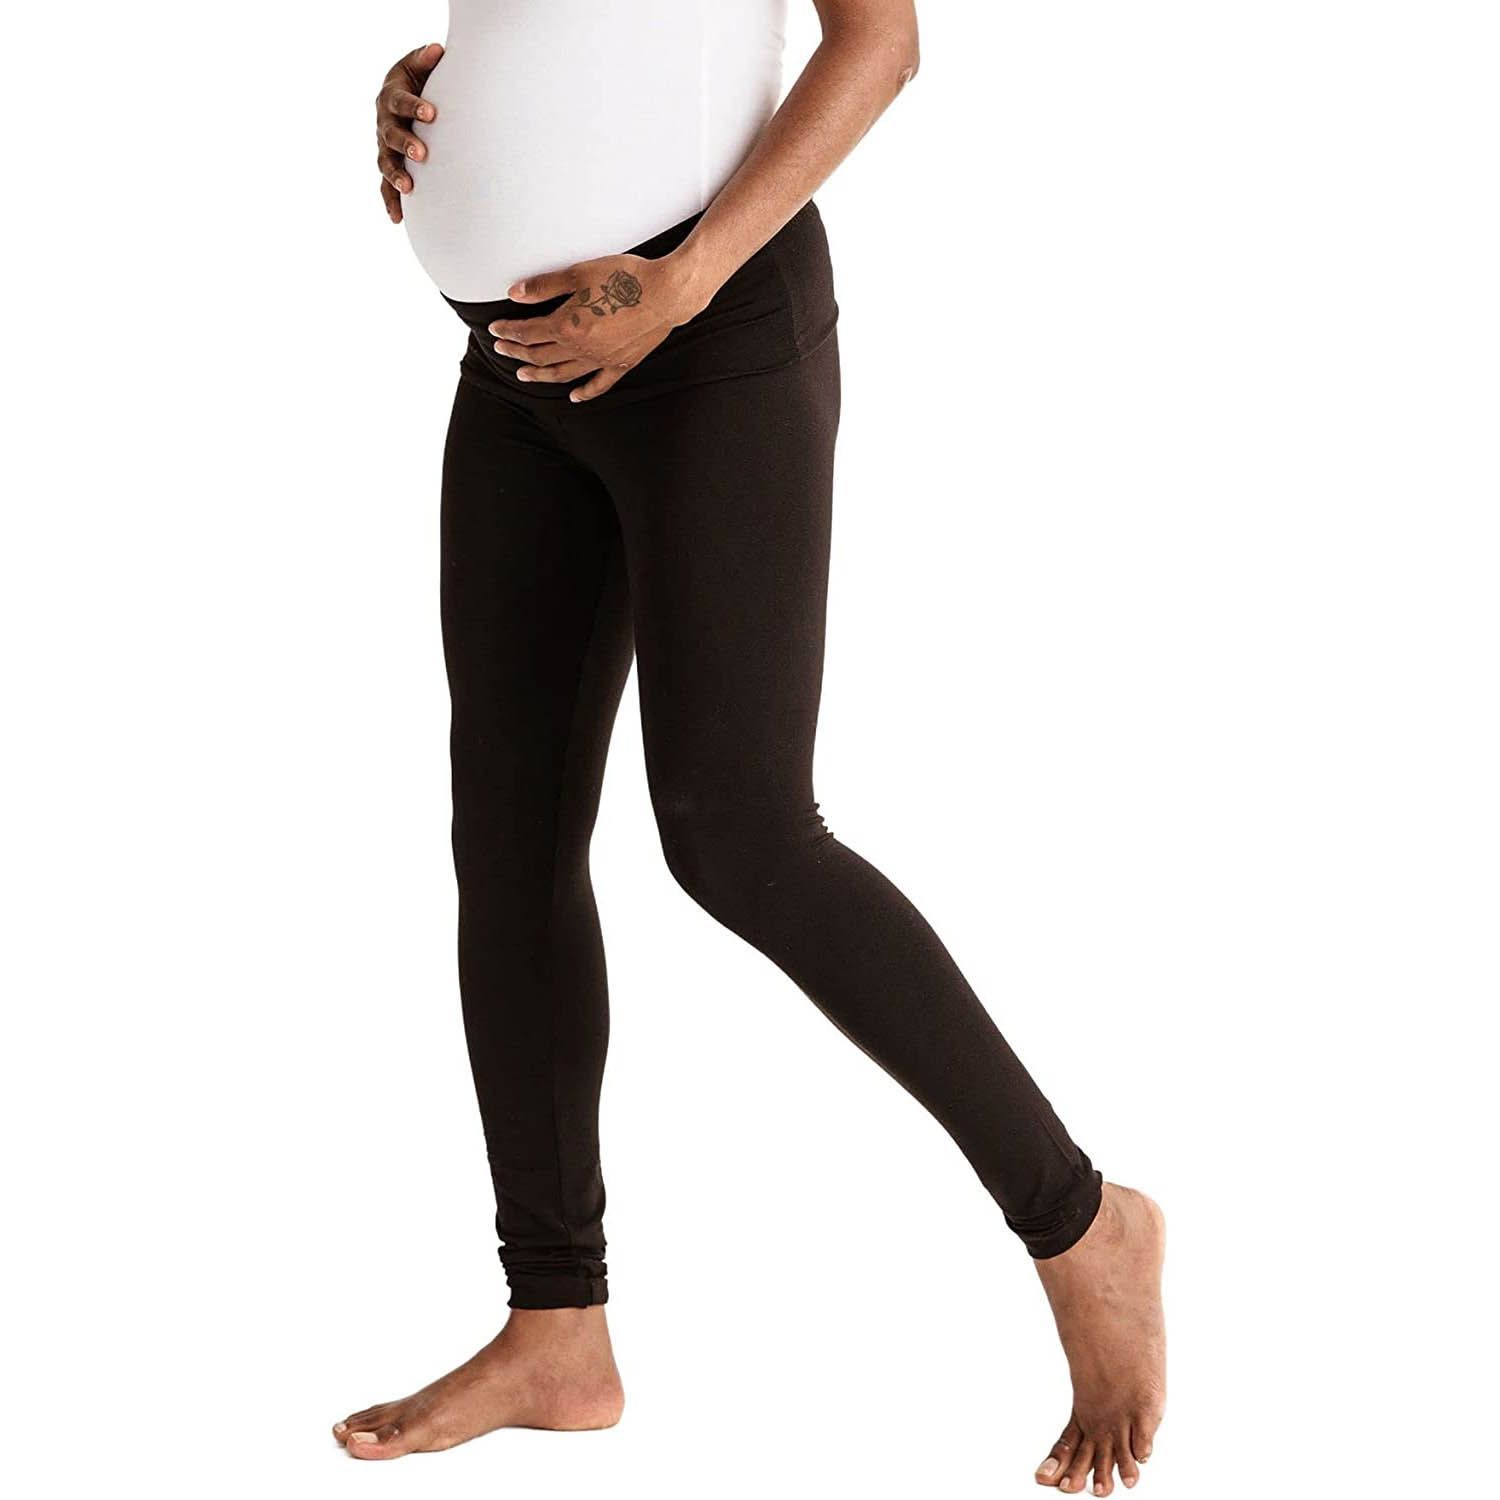 Enerful Fleece Lined Maternity Leggings Workout Activewear Winter Warm  Pregnancy Thermal Pants with Pockets 2PCS Black Small at Amazon Women's  Clothing store